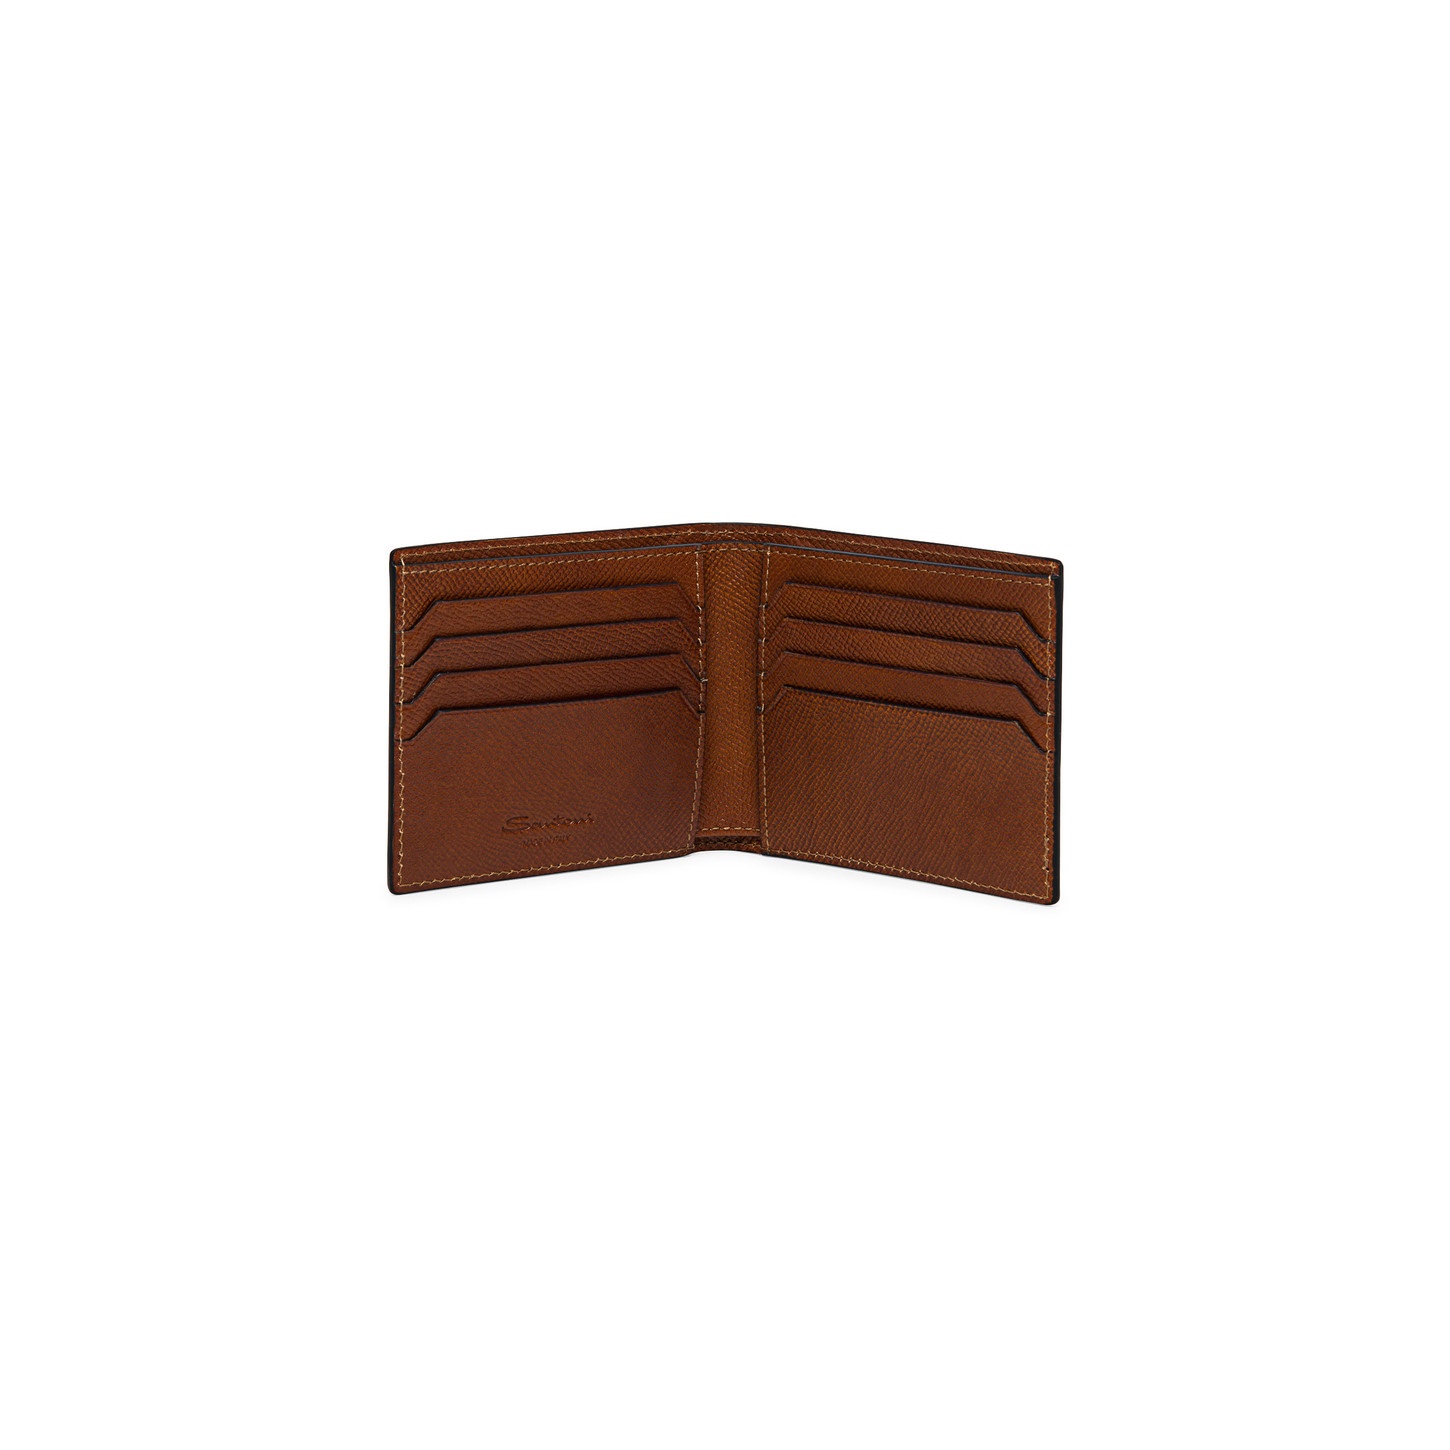 Brown saffiano leather wallet - 3